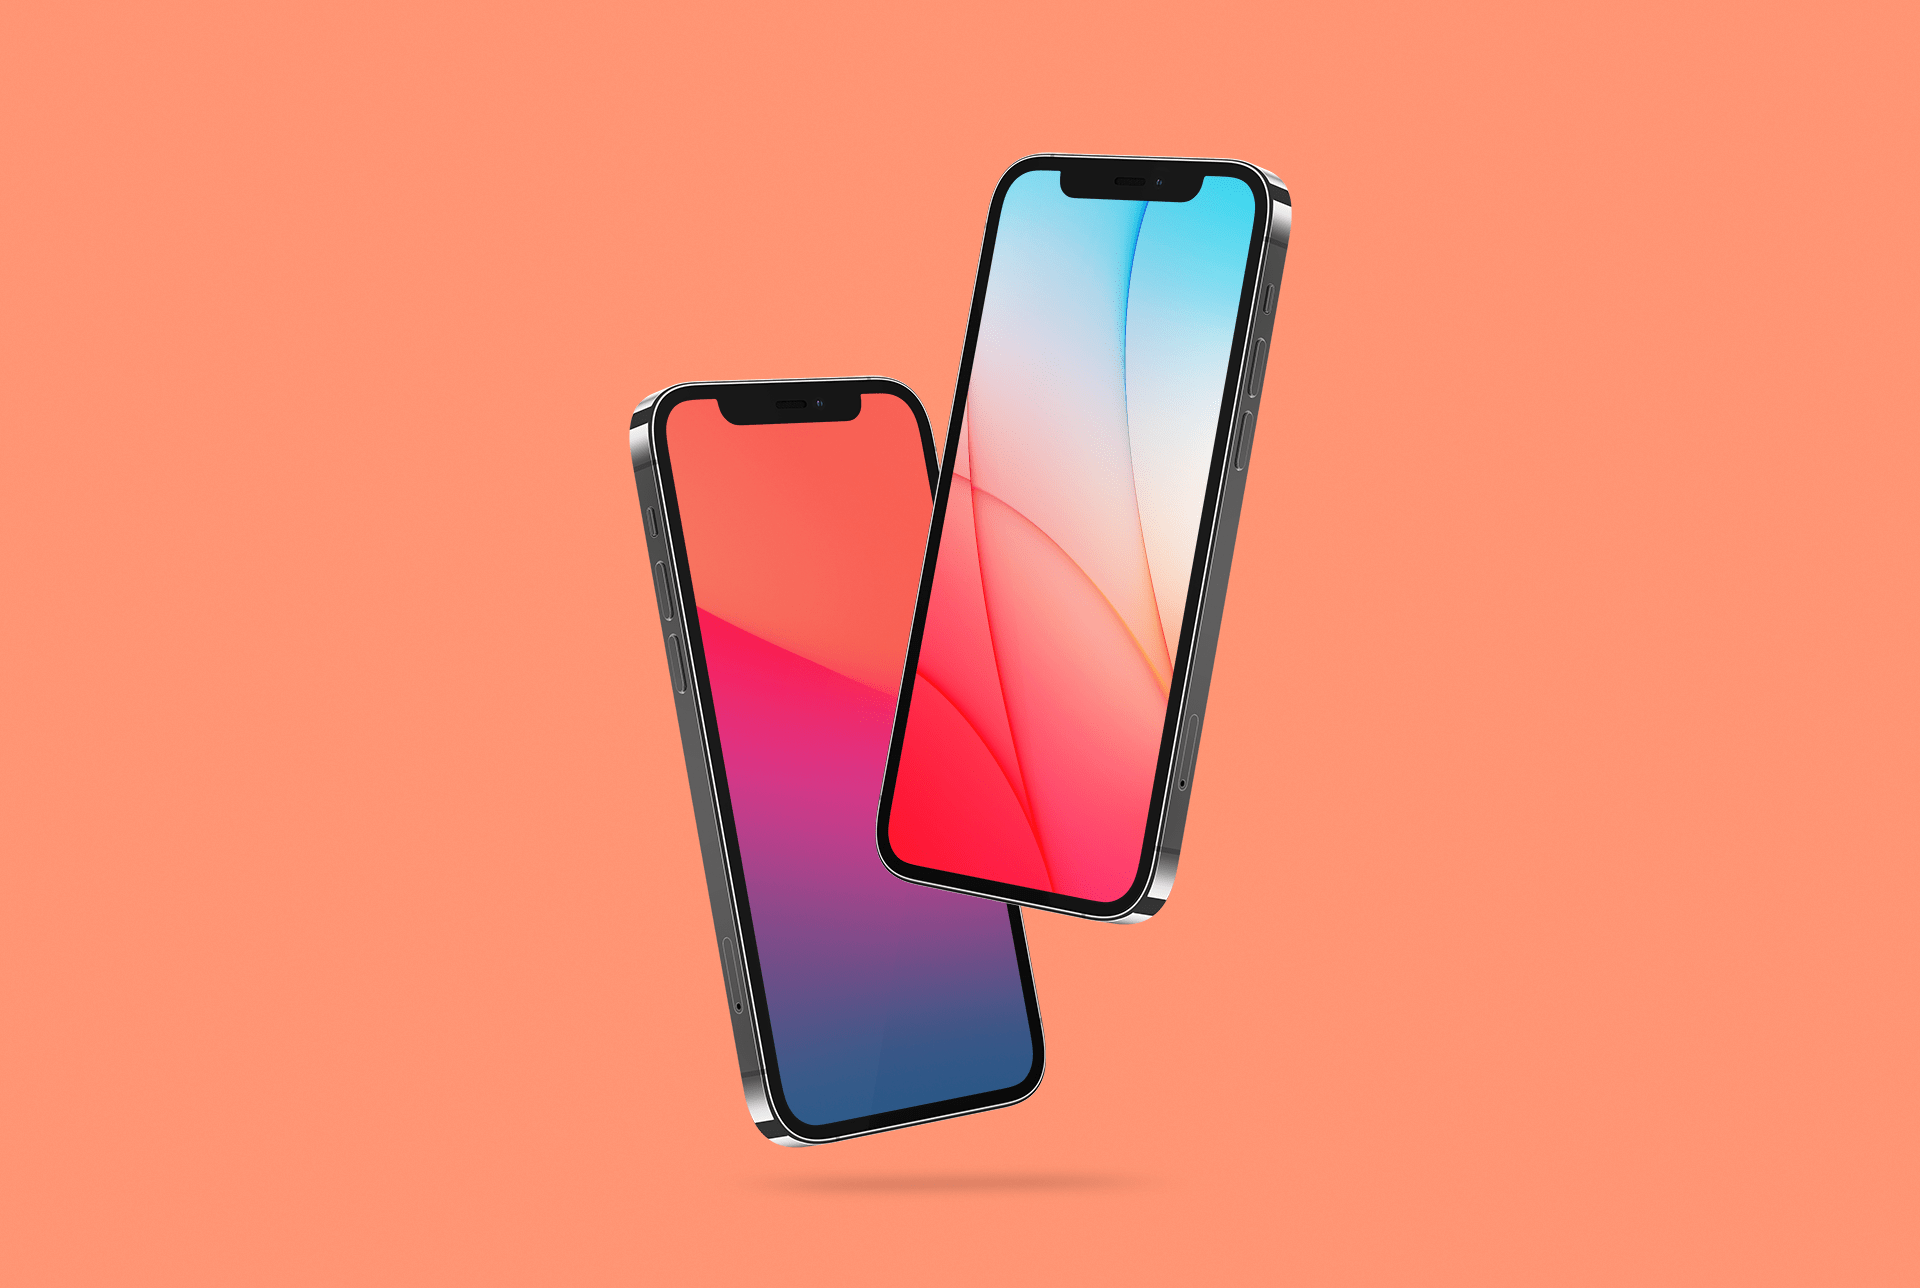 Geni Zem on X iOS 15 Concept wallpaper httpstcoyySgd5BZ3n More  wallpapers httpstcoUoeNG0fQMT httpstcoT9gP9SR0Ad GraphicDesign  background lockscreeen iOS15 wallpapers design abstract Apple  iPhone12Pro iPhone12SPro minimal 